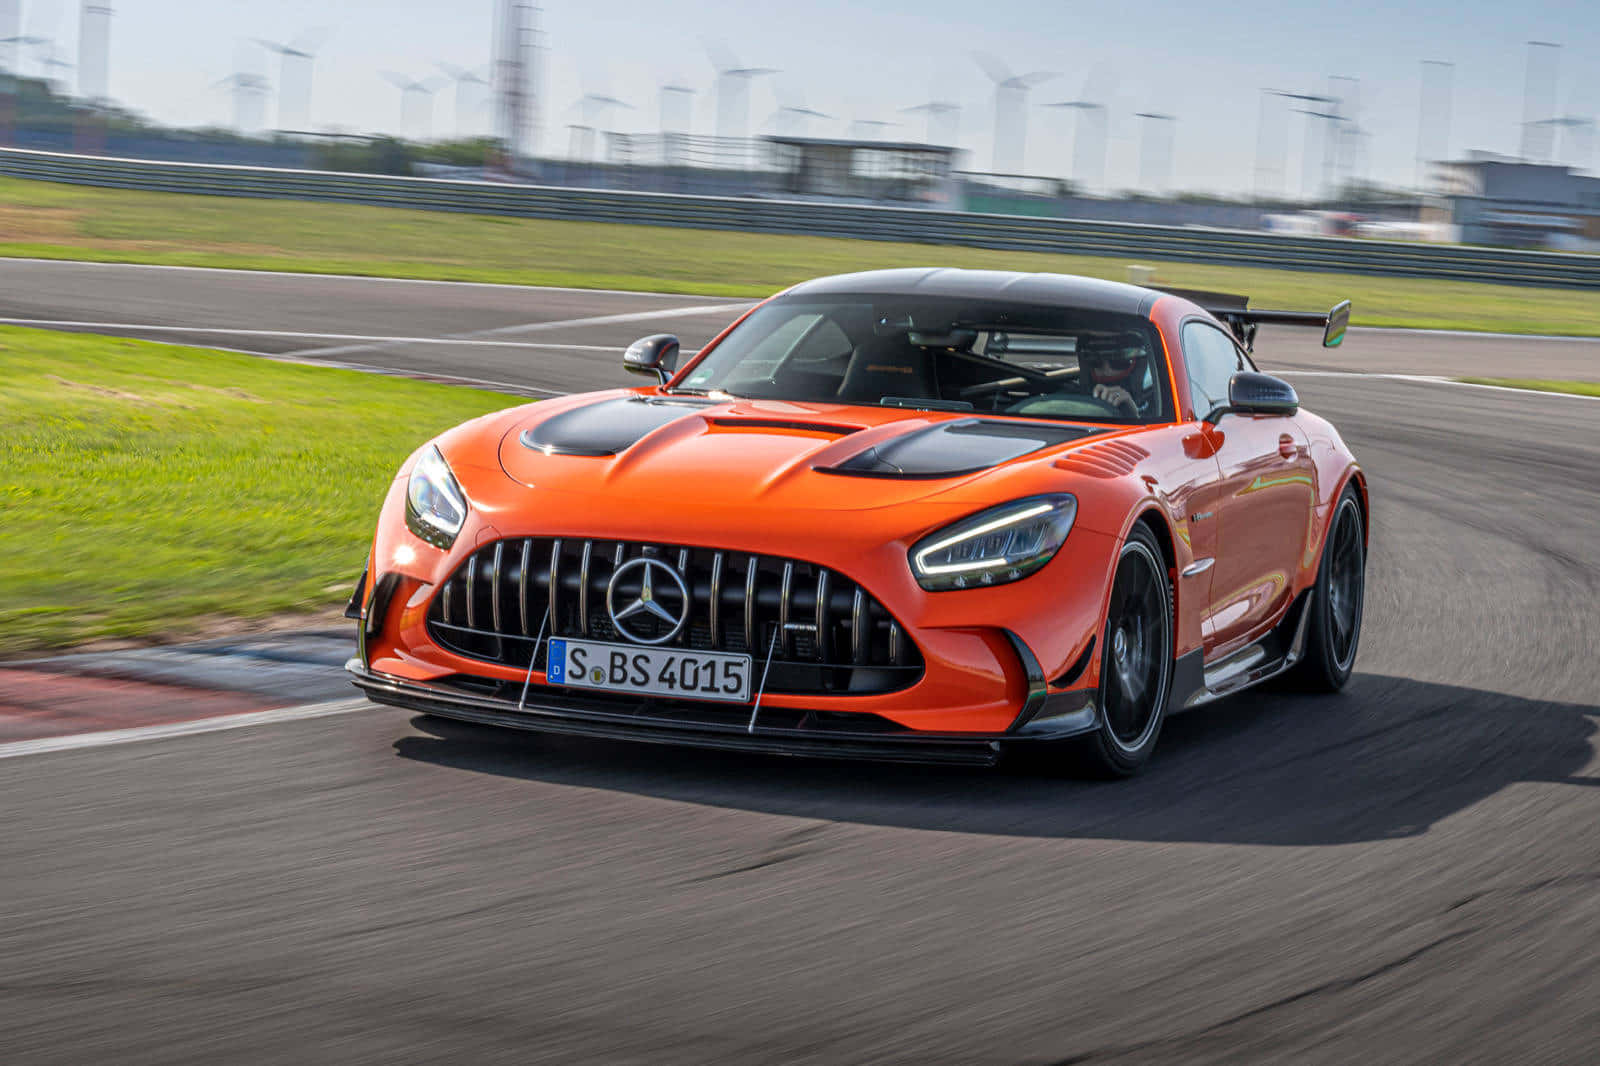 Get behind the wheel of the luxury Mercedes GTS Wallpaper